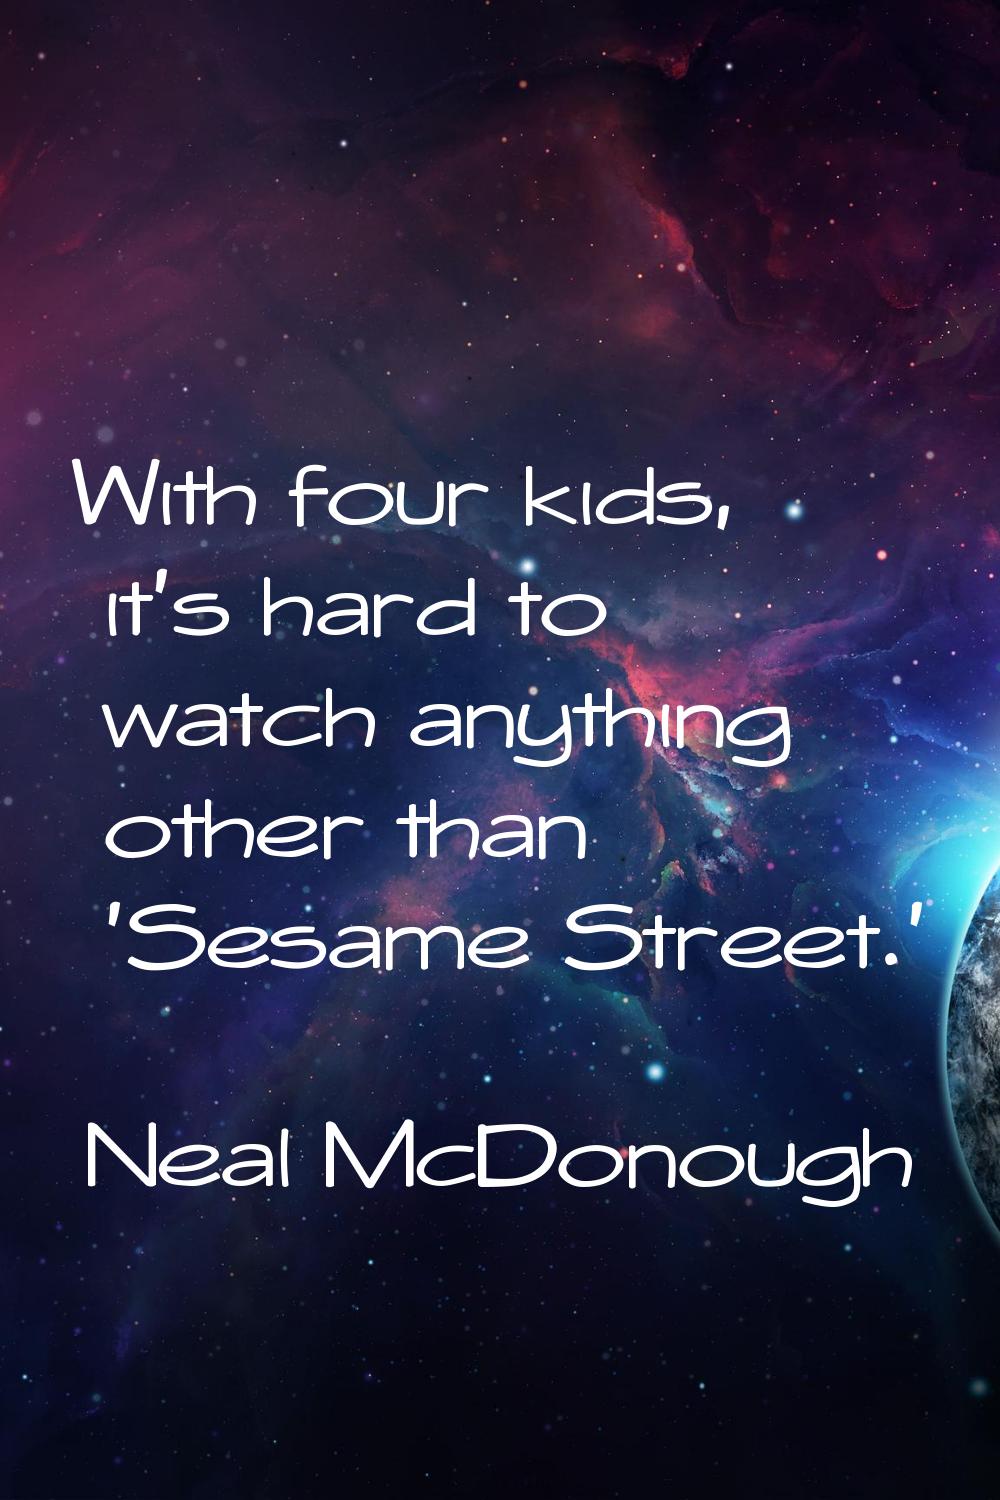 With four kids, it's hard to watch anything other than 'Sesame Street.'